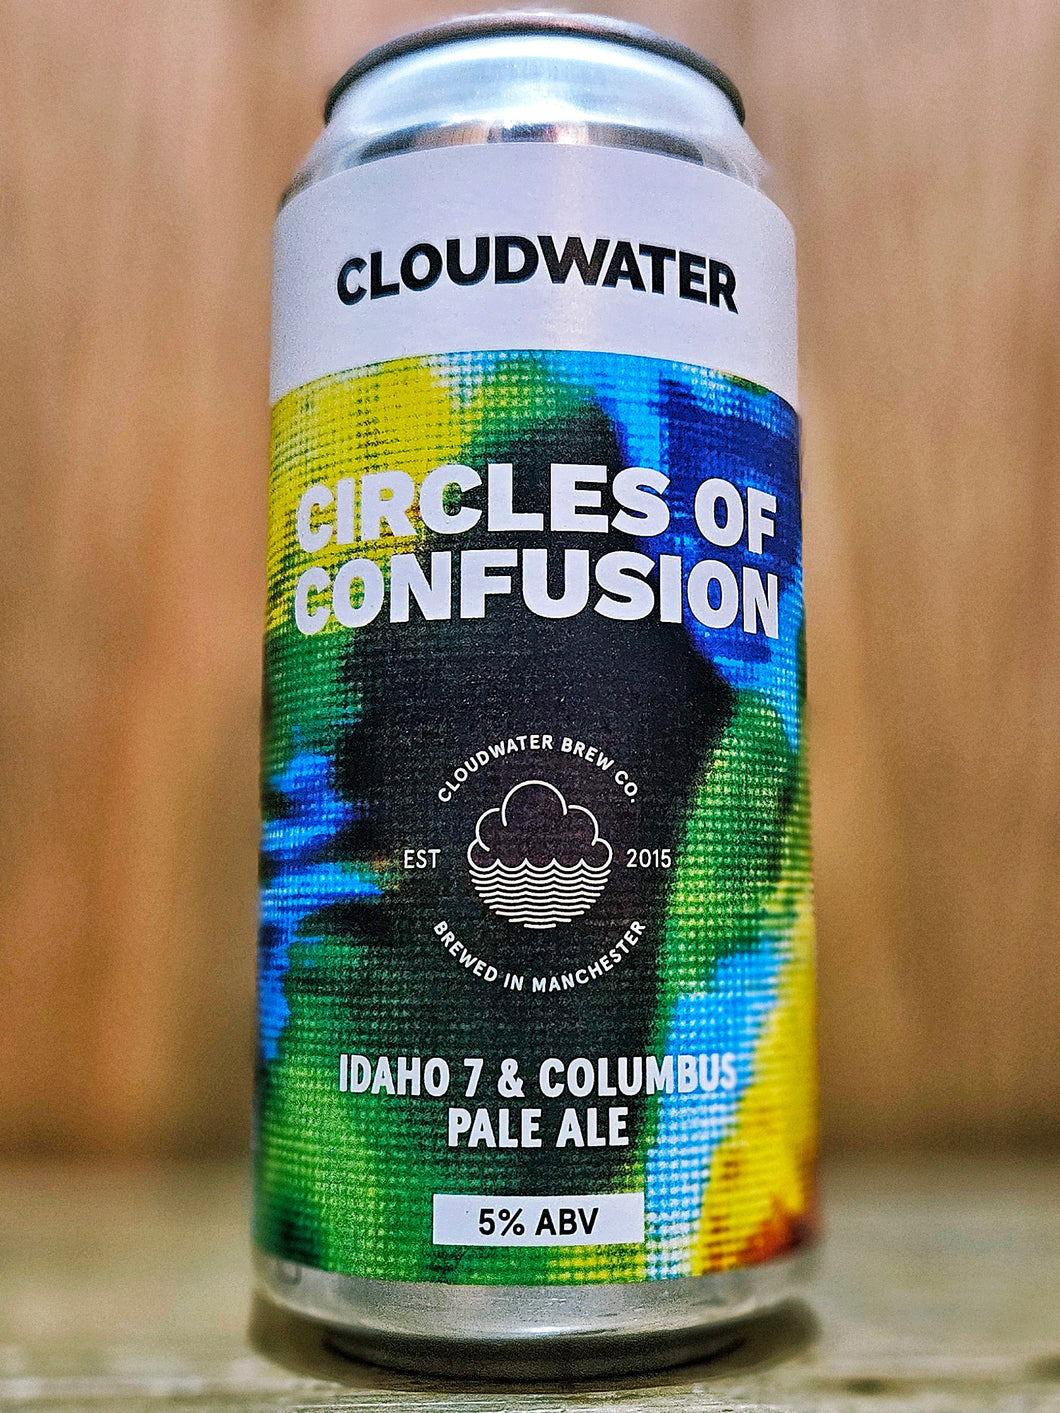 Cloudwater - Circles Of Confusion